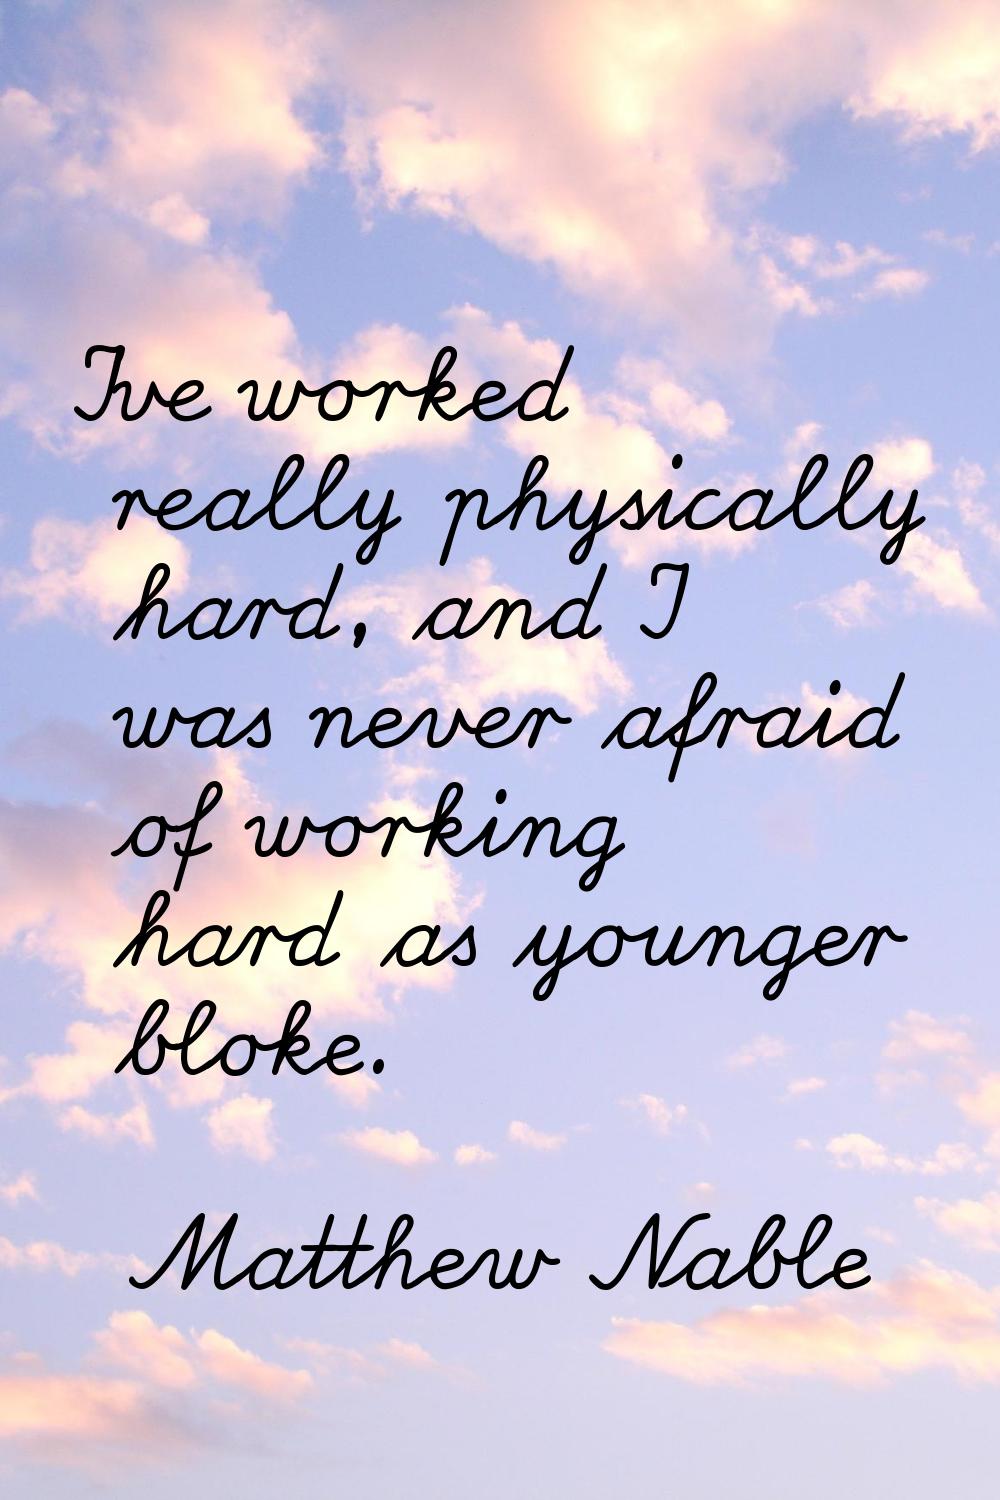 I've worked really physically hard, and I was never afraid of working hard as younger bloke.